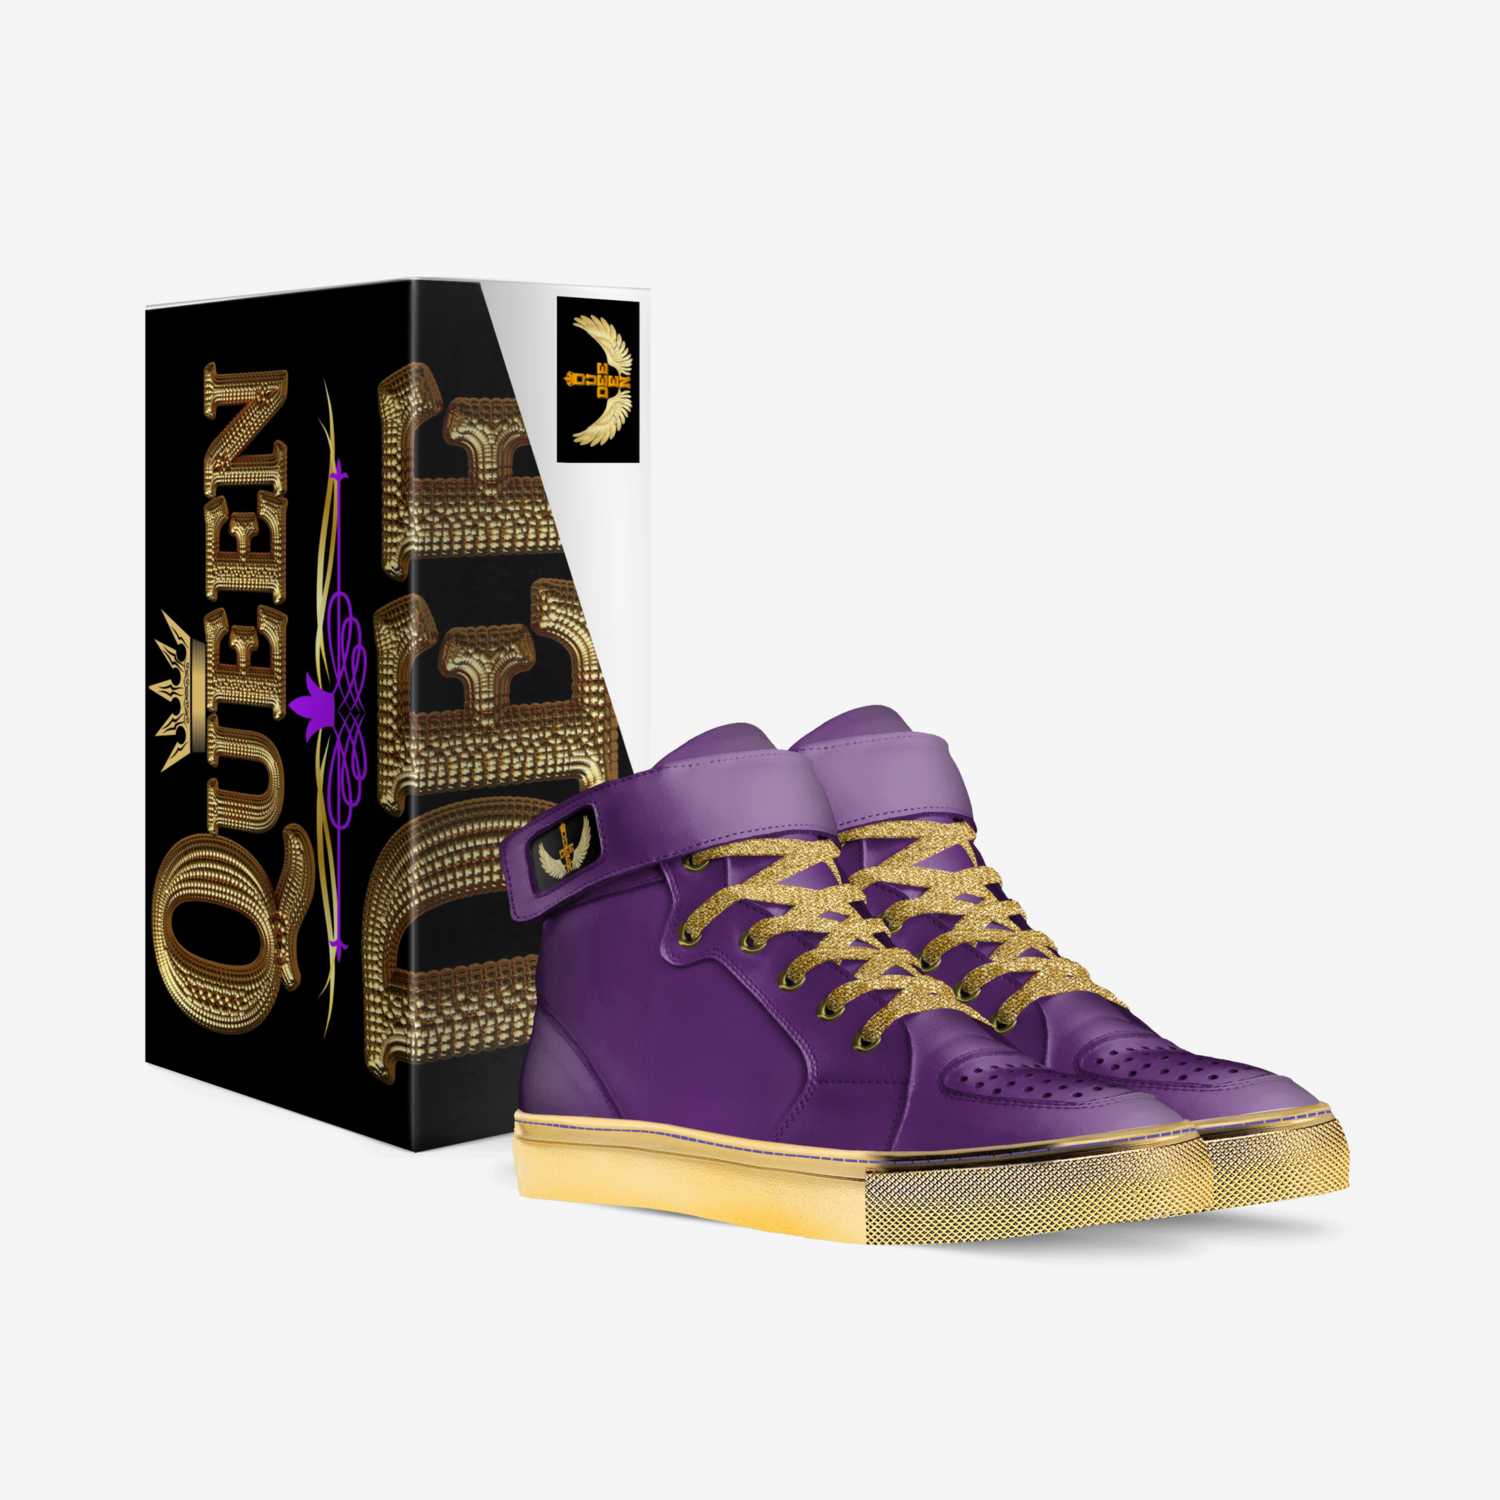 Queen Dee custom made in Italy shoes by Latoya Easley | Box view